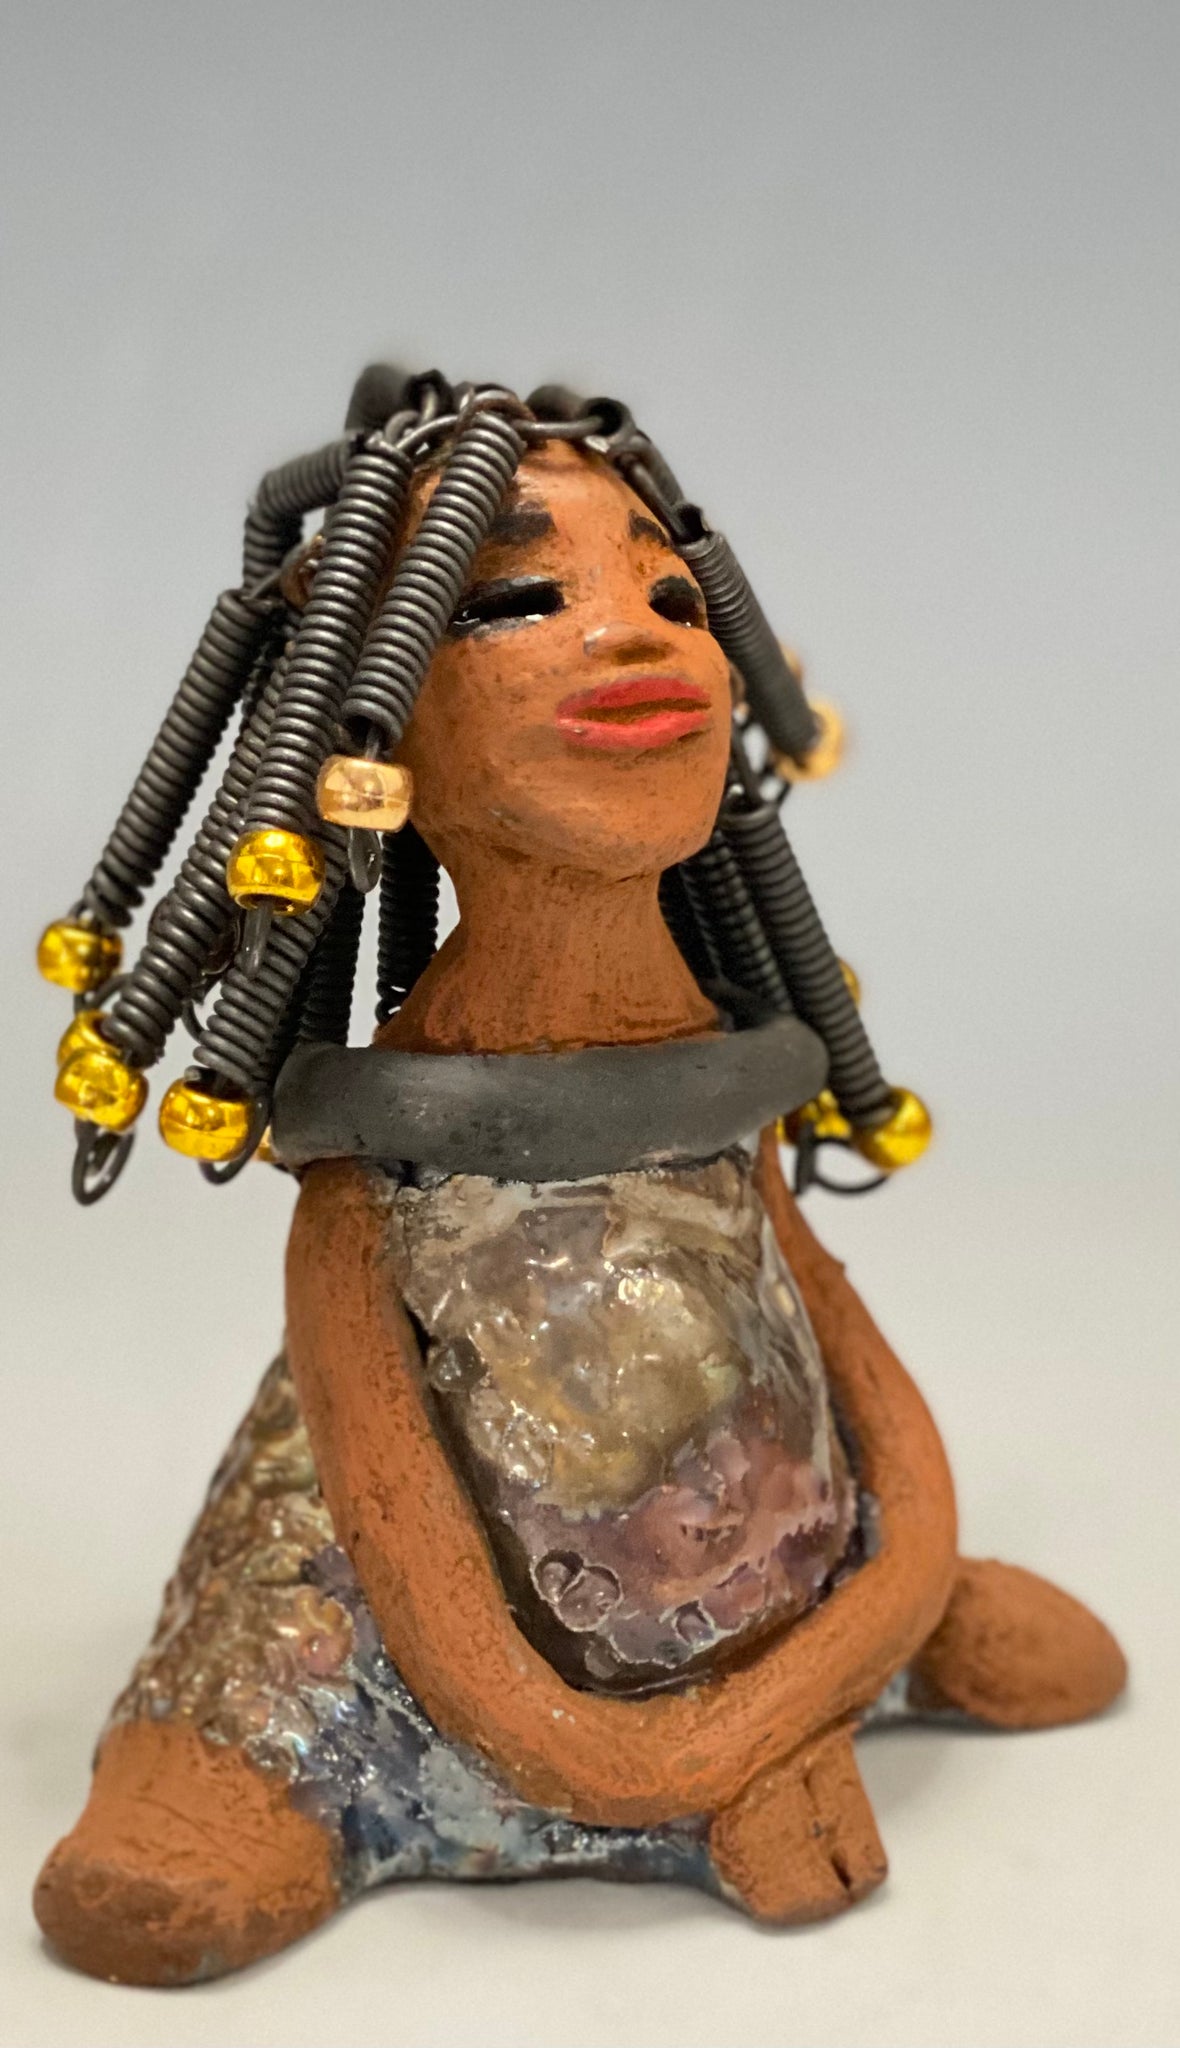   Meet Sadie  Sadie stands 5.5" x 4" x 3" and weighs 8.7 ozs. She wears a lovely glossy  metallic gold dress.. Sadie has over15 feet of coiled wire hair. Sadie appears to sit in a yoga pose. Her long arms rest at her side. Sadie is a great starter piece from the Herdew Collection!